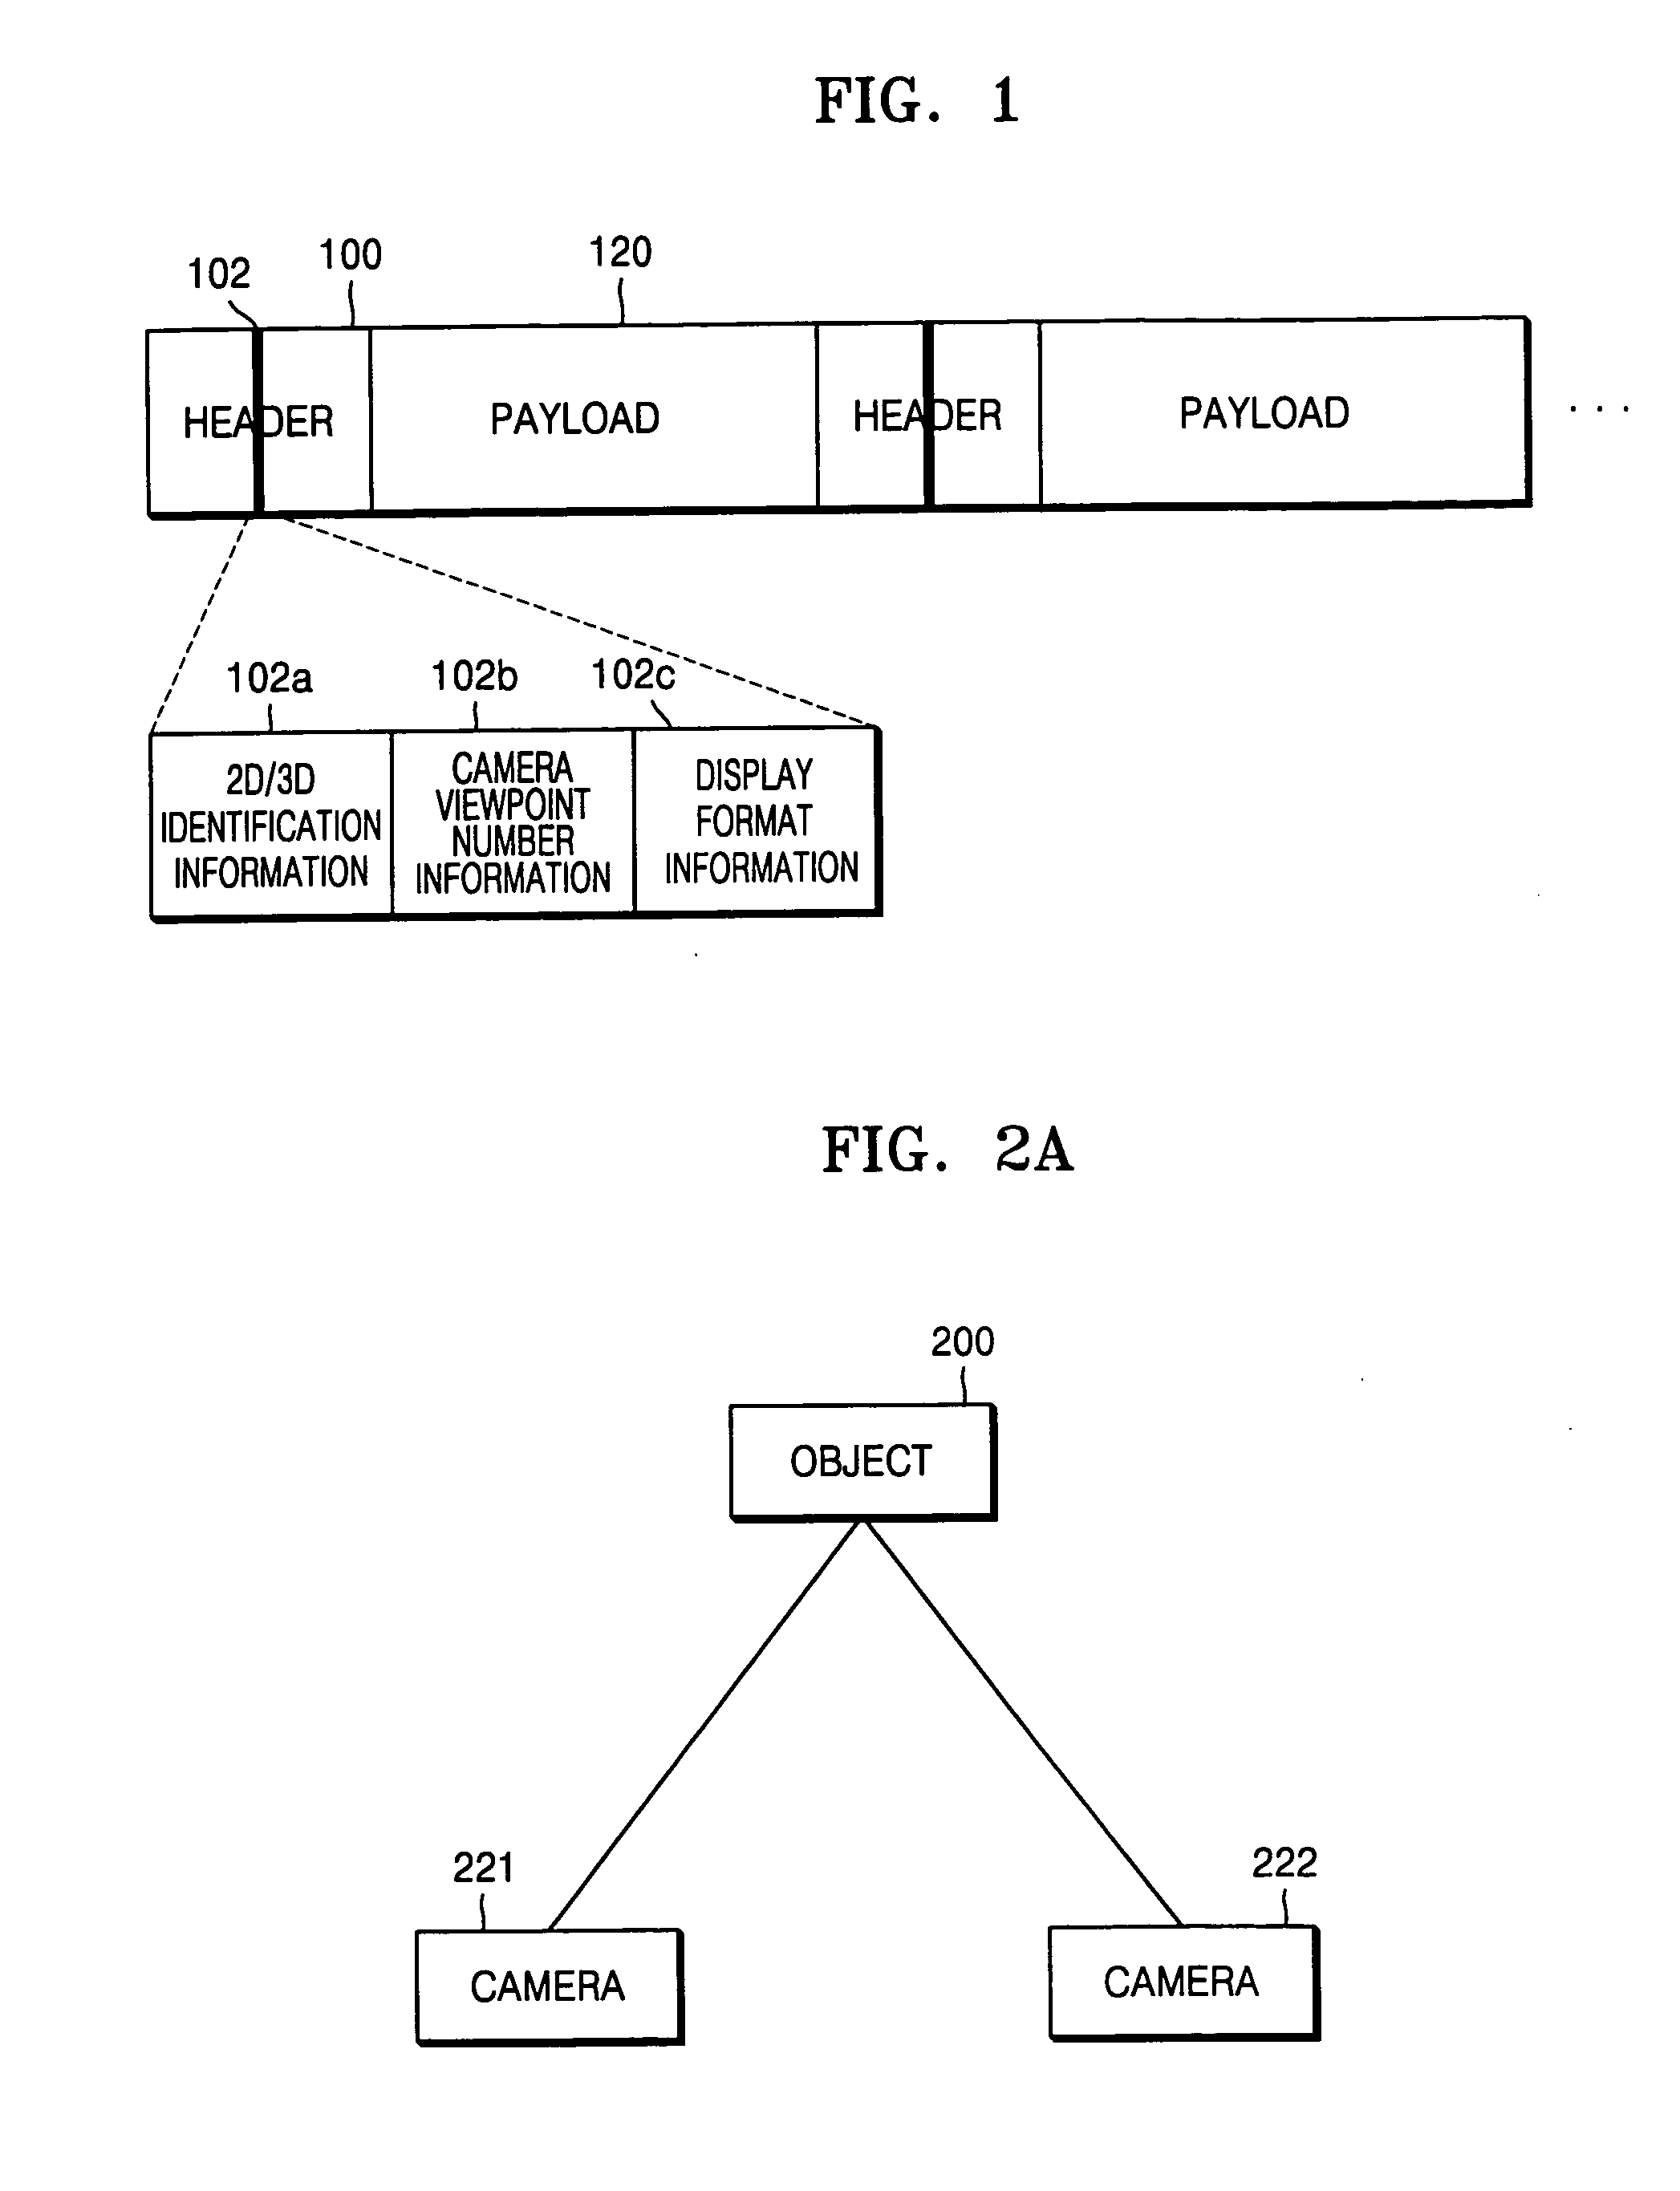 Transport stream structure including image data and apparatus and method for transmitting and receiving image data